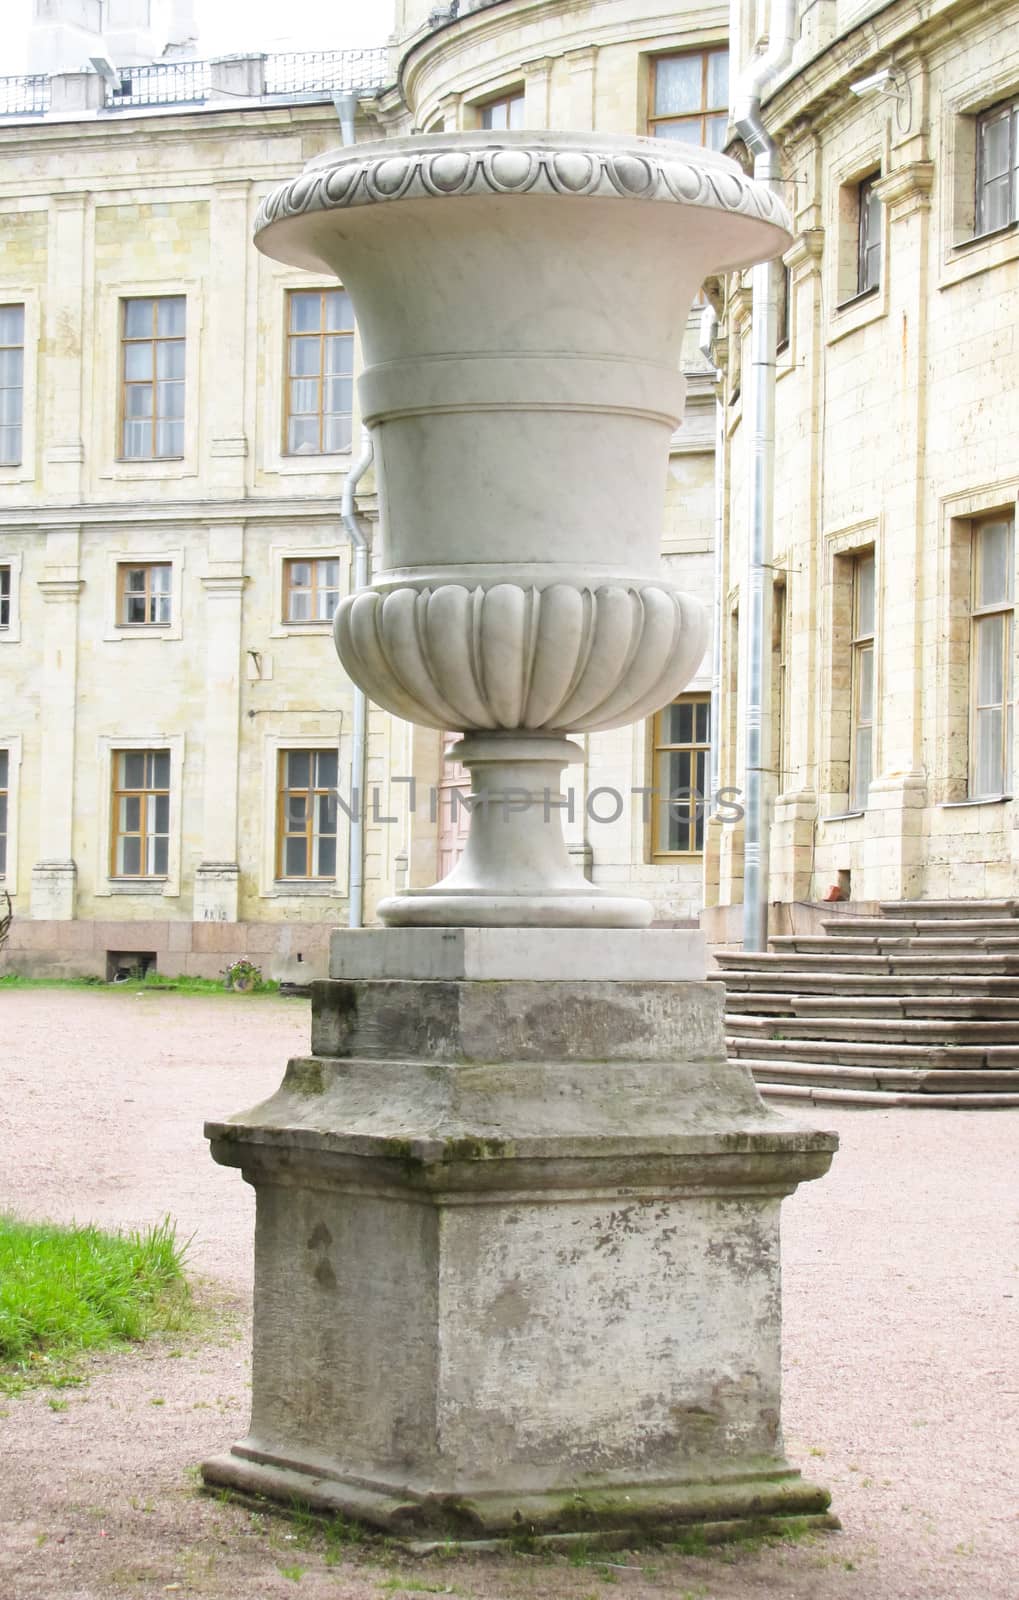 vase on the pedestal of the statue in the courtyard of the palace